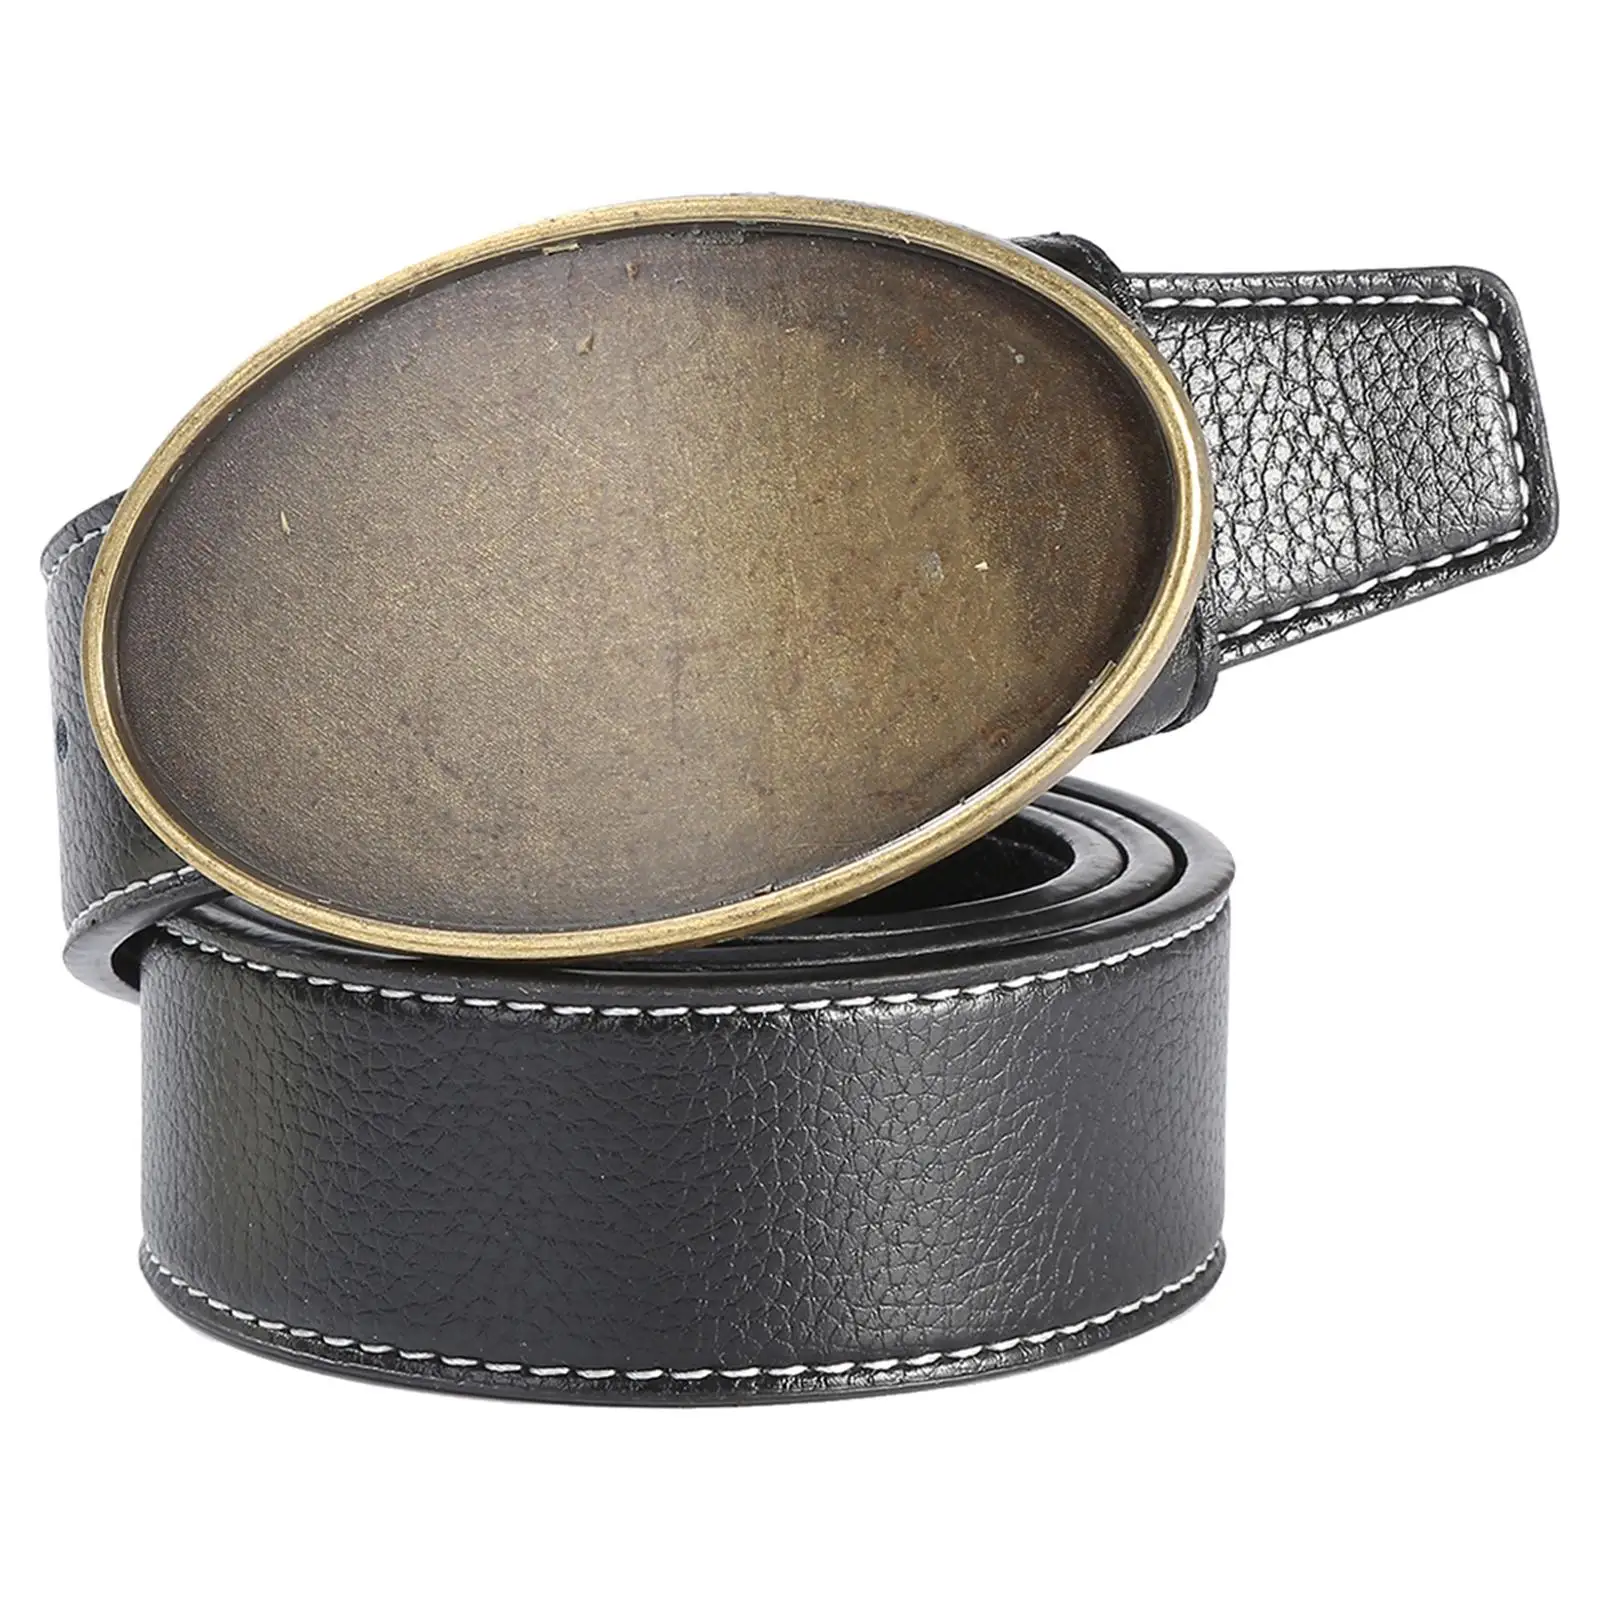 Men`s Belt PU Leather with Buckle Waistband Wild West Cowboy Belt for Work Business Son